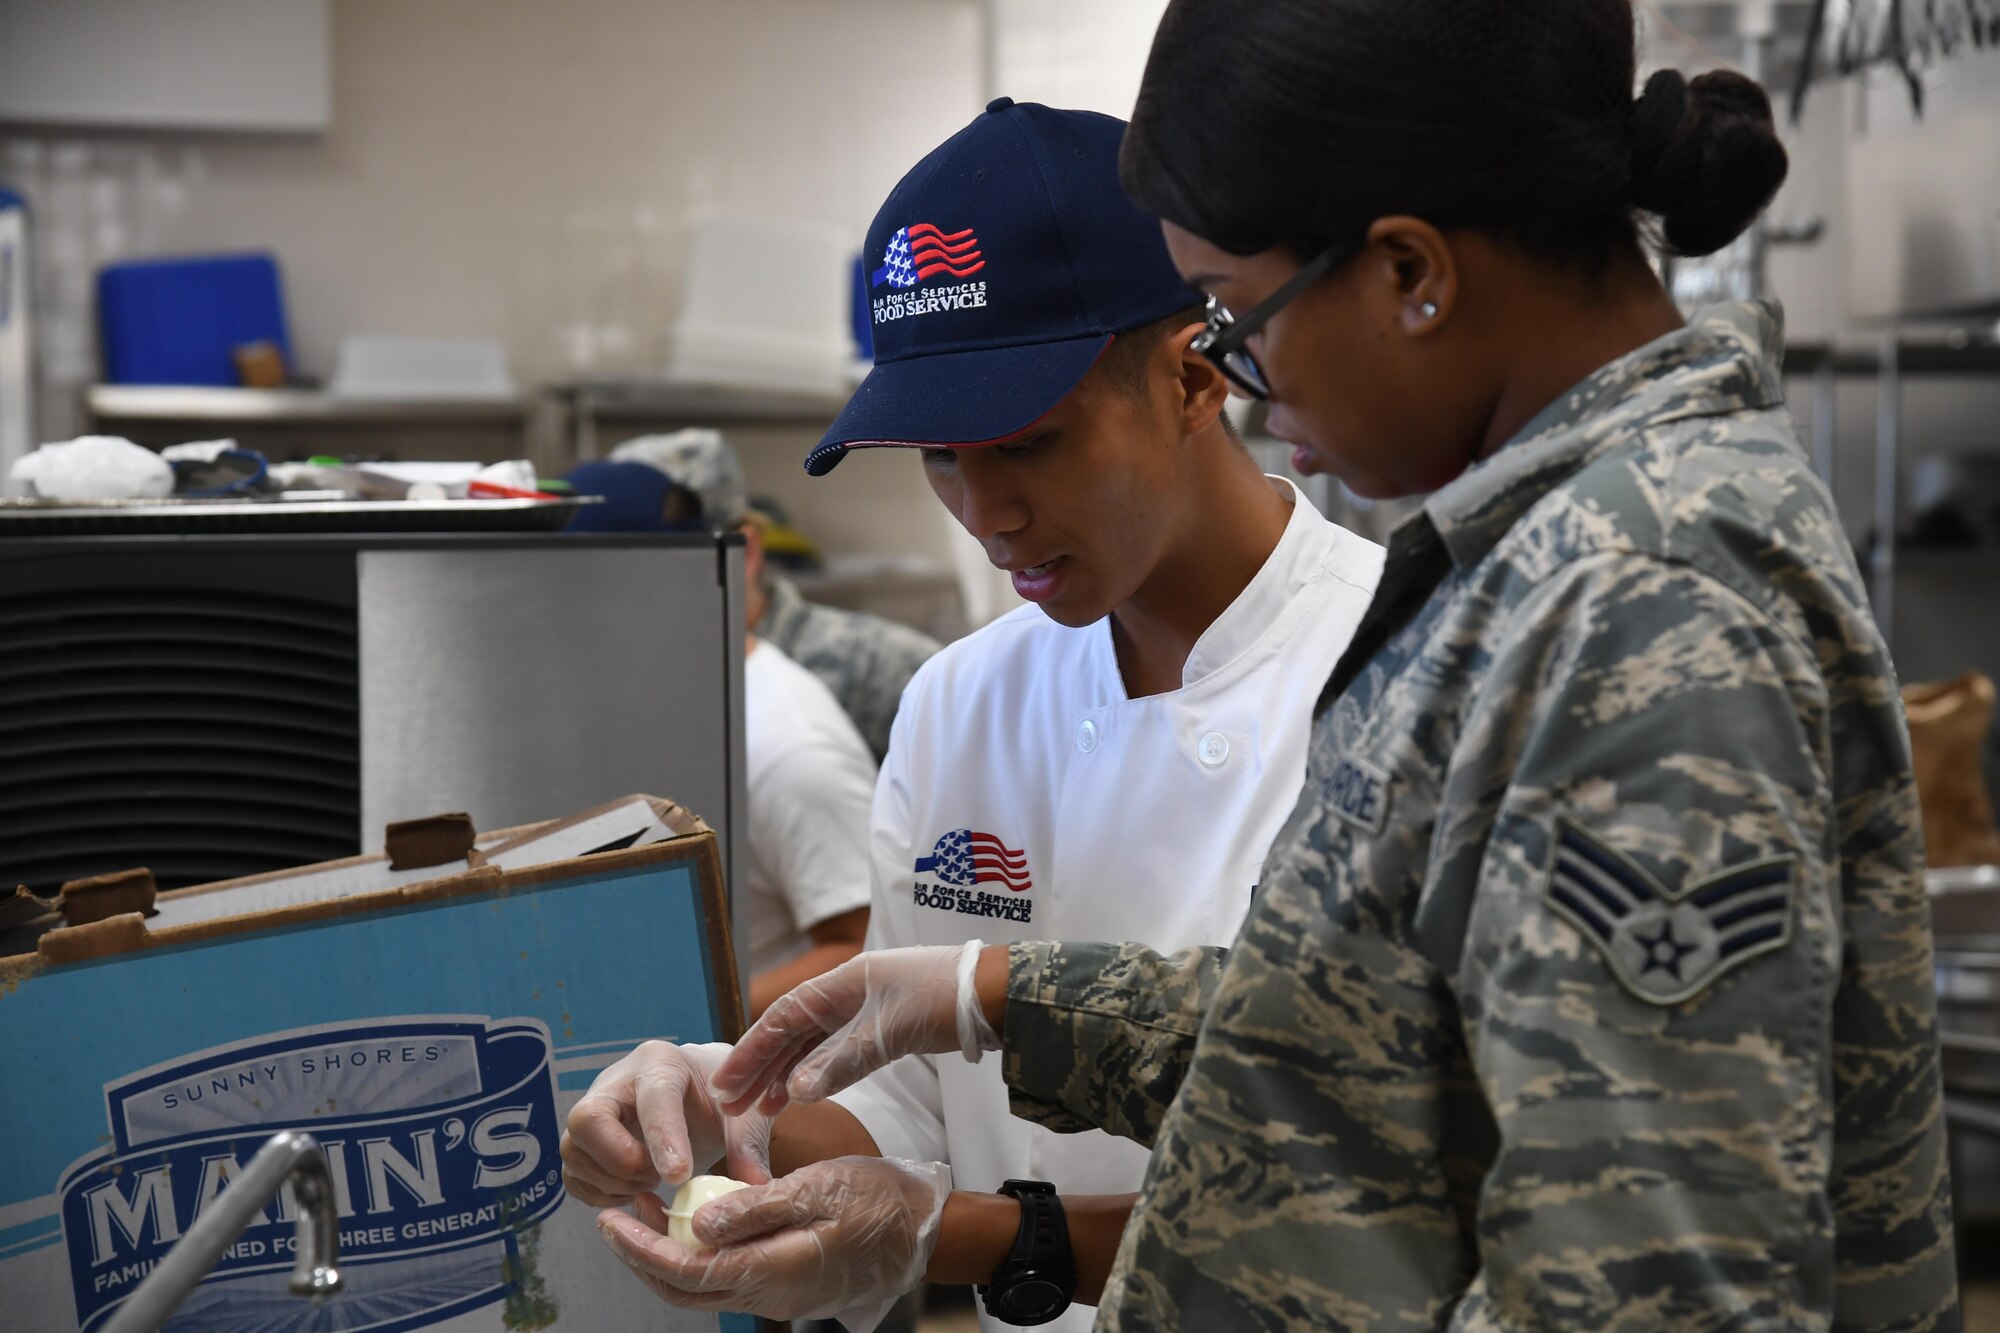 Airman 1st Class Lester Torres, 2nd Force Support Squadron food services apprentice prepares a garnish during an advanced culinary skills course graduation at the Red River Dining Facility at Barksdale Air Force Base, La., Aug. 18, 2017.Torres, demonstrated to other Airmen how to create a garnish using a hardboiled egg.